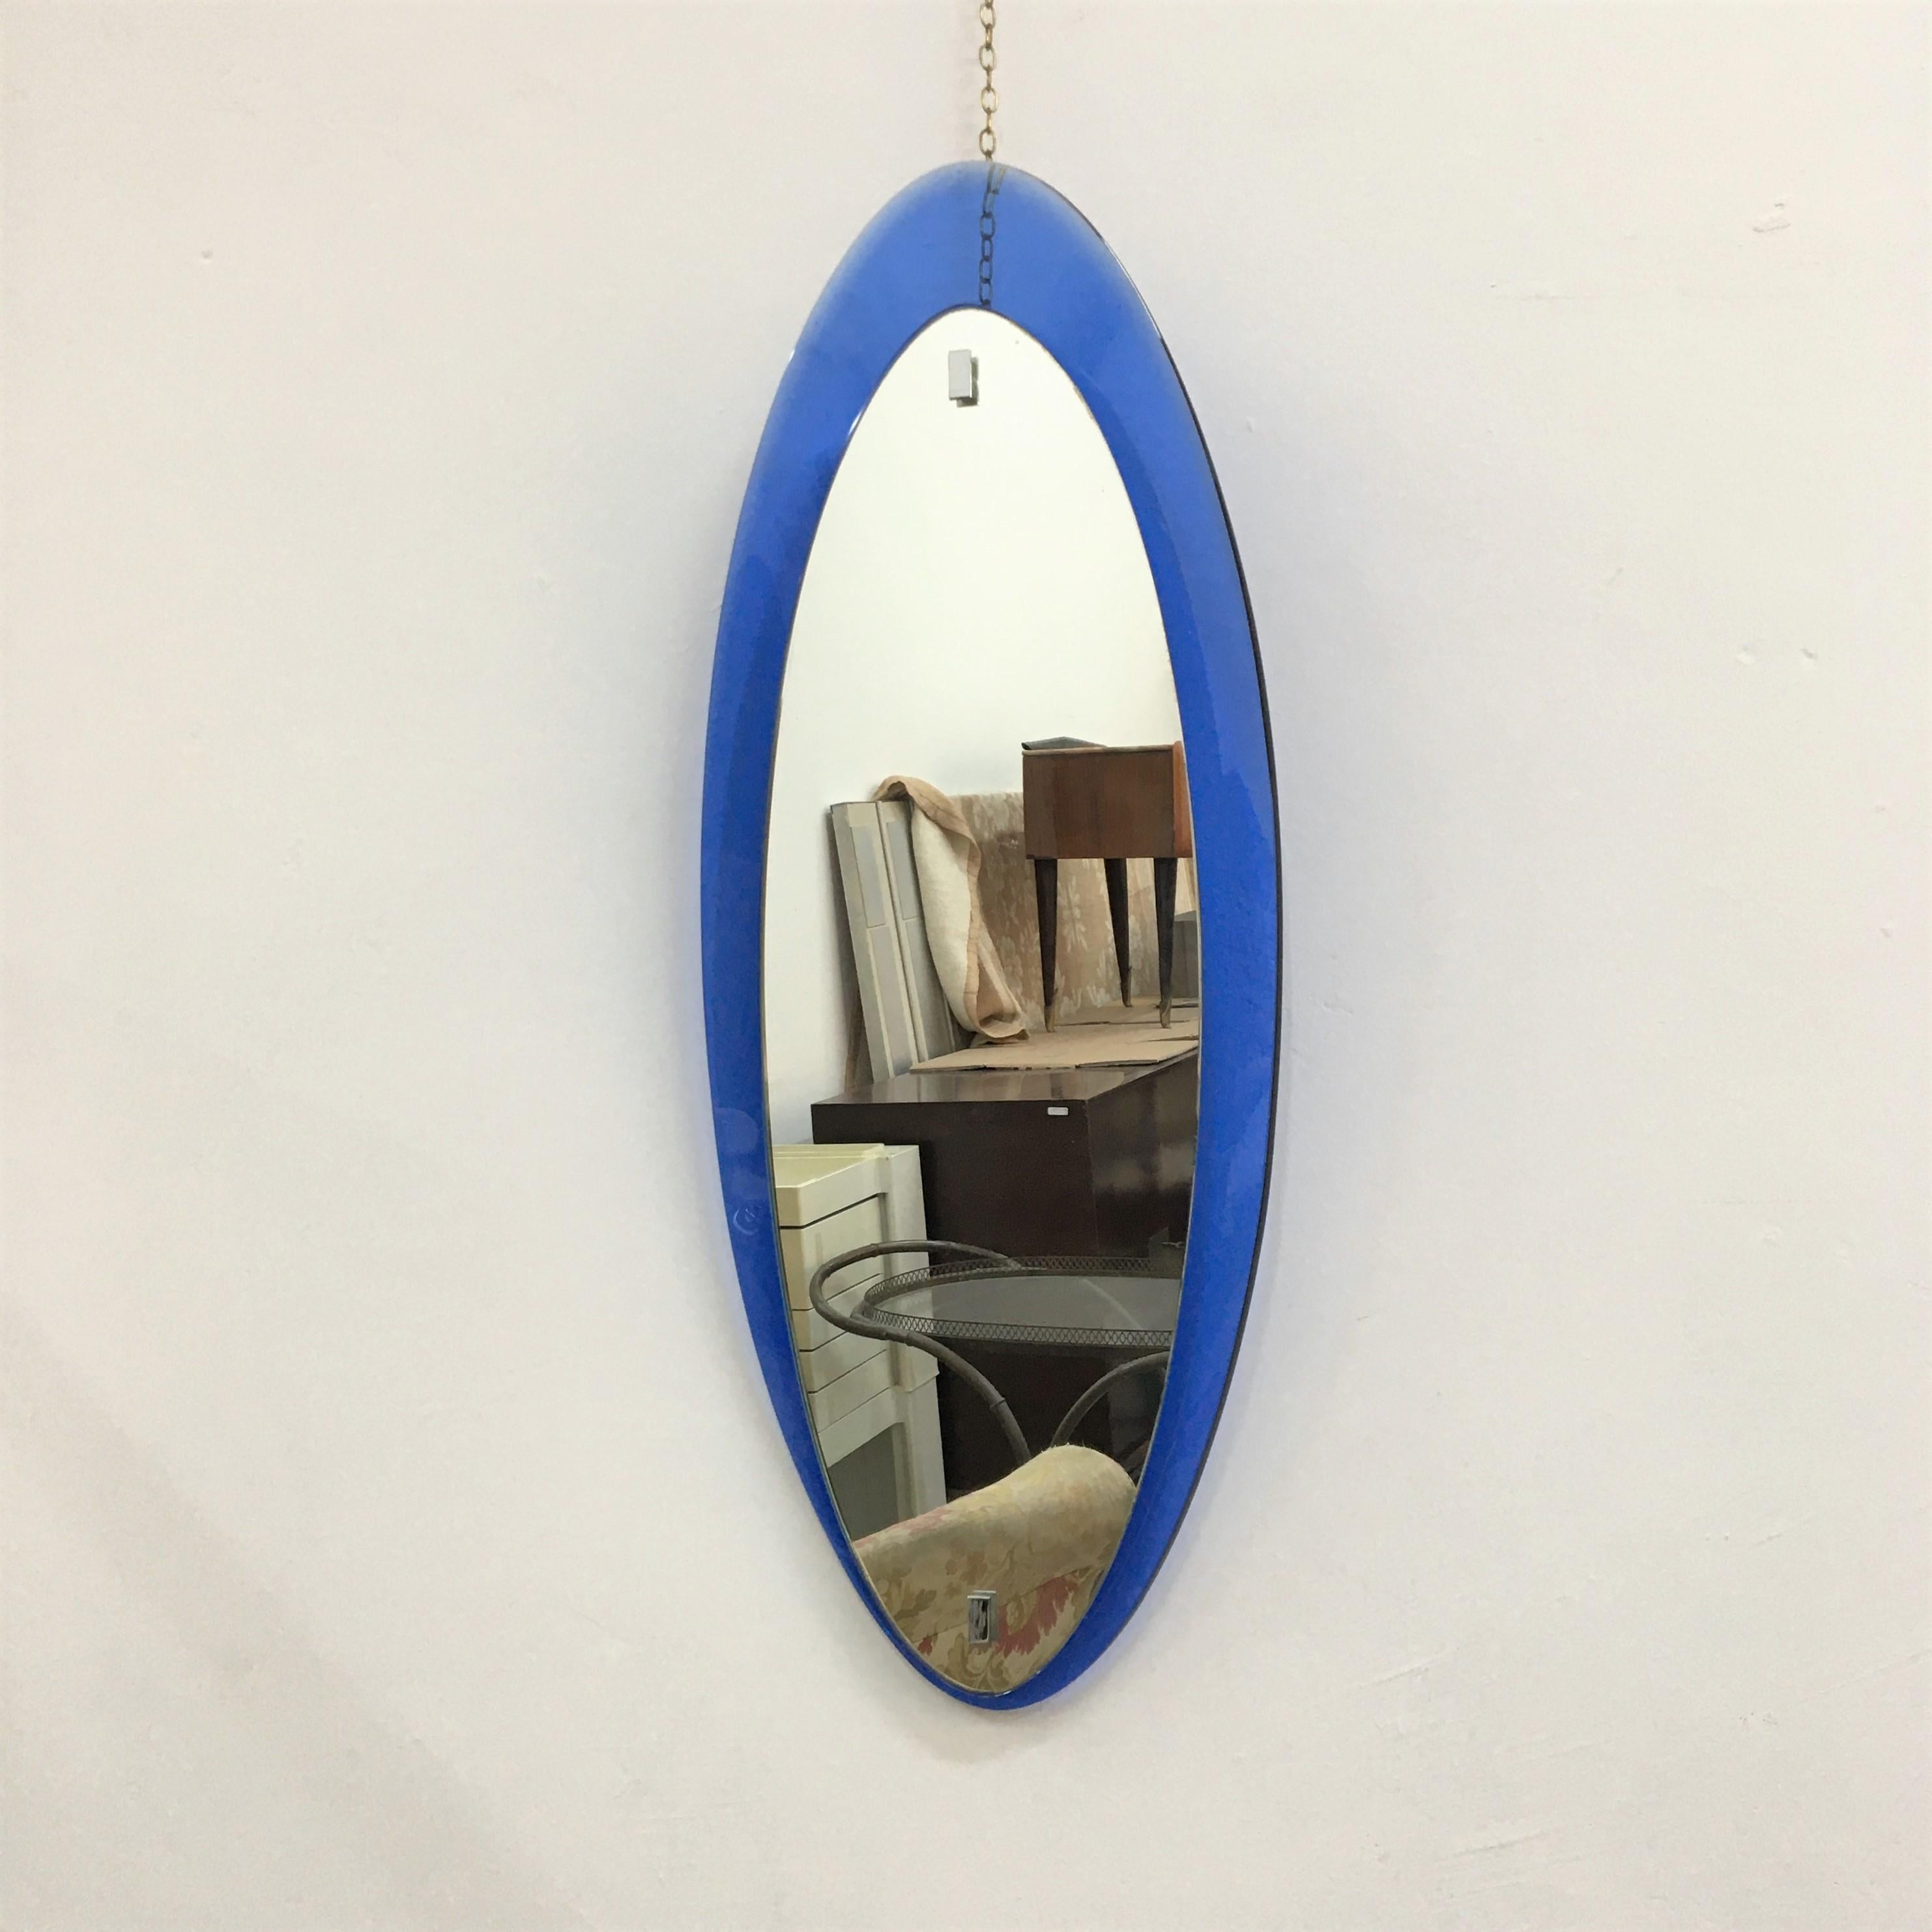 Beautiful mirror in Fontana Arte style, 1960s. It has a very particular narrow oval shape with a blue fontana frame.
Wear consistent with age and us.